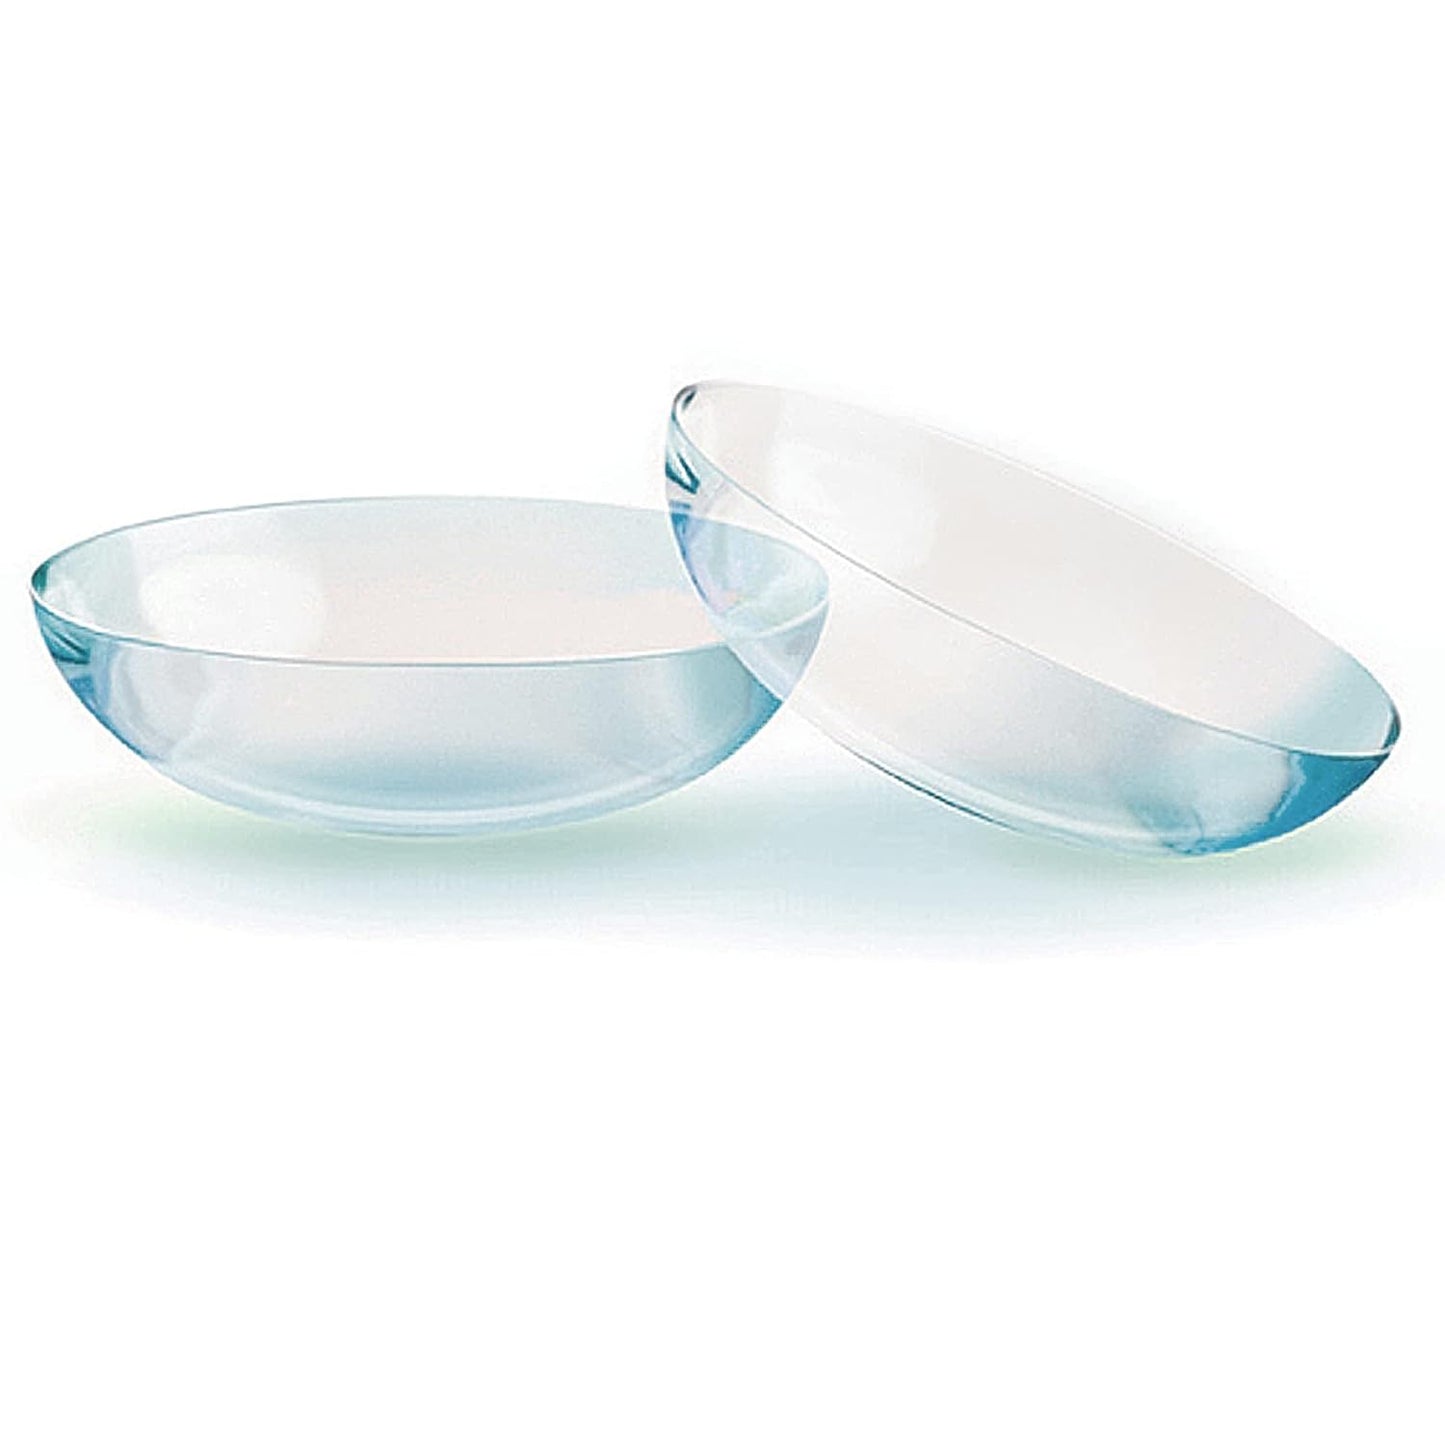 Bausch & Lomb Softlens Daily Disposable Contact Lens (Clear, 30 Lenses)